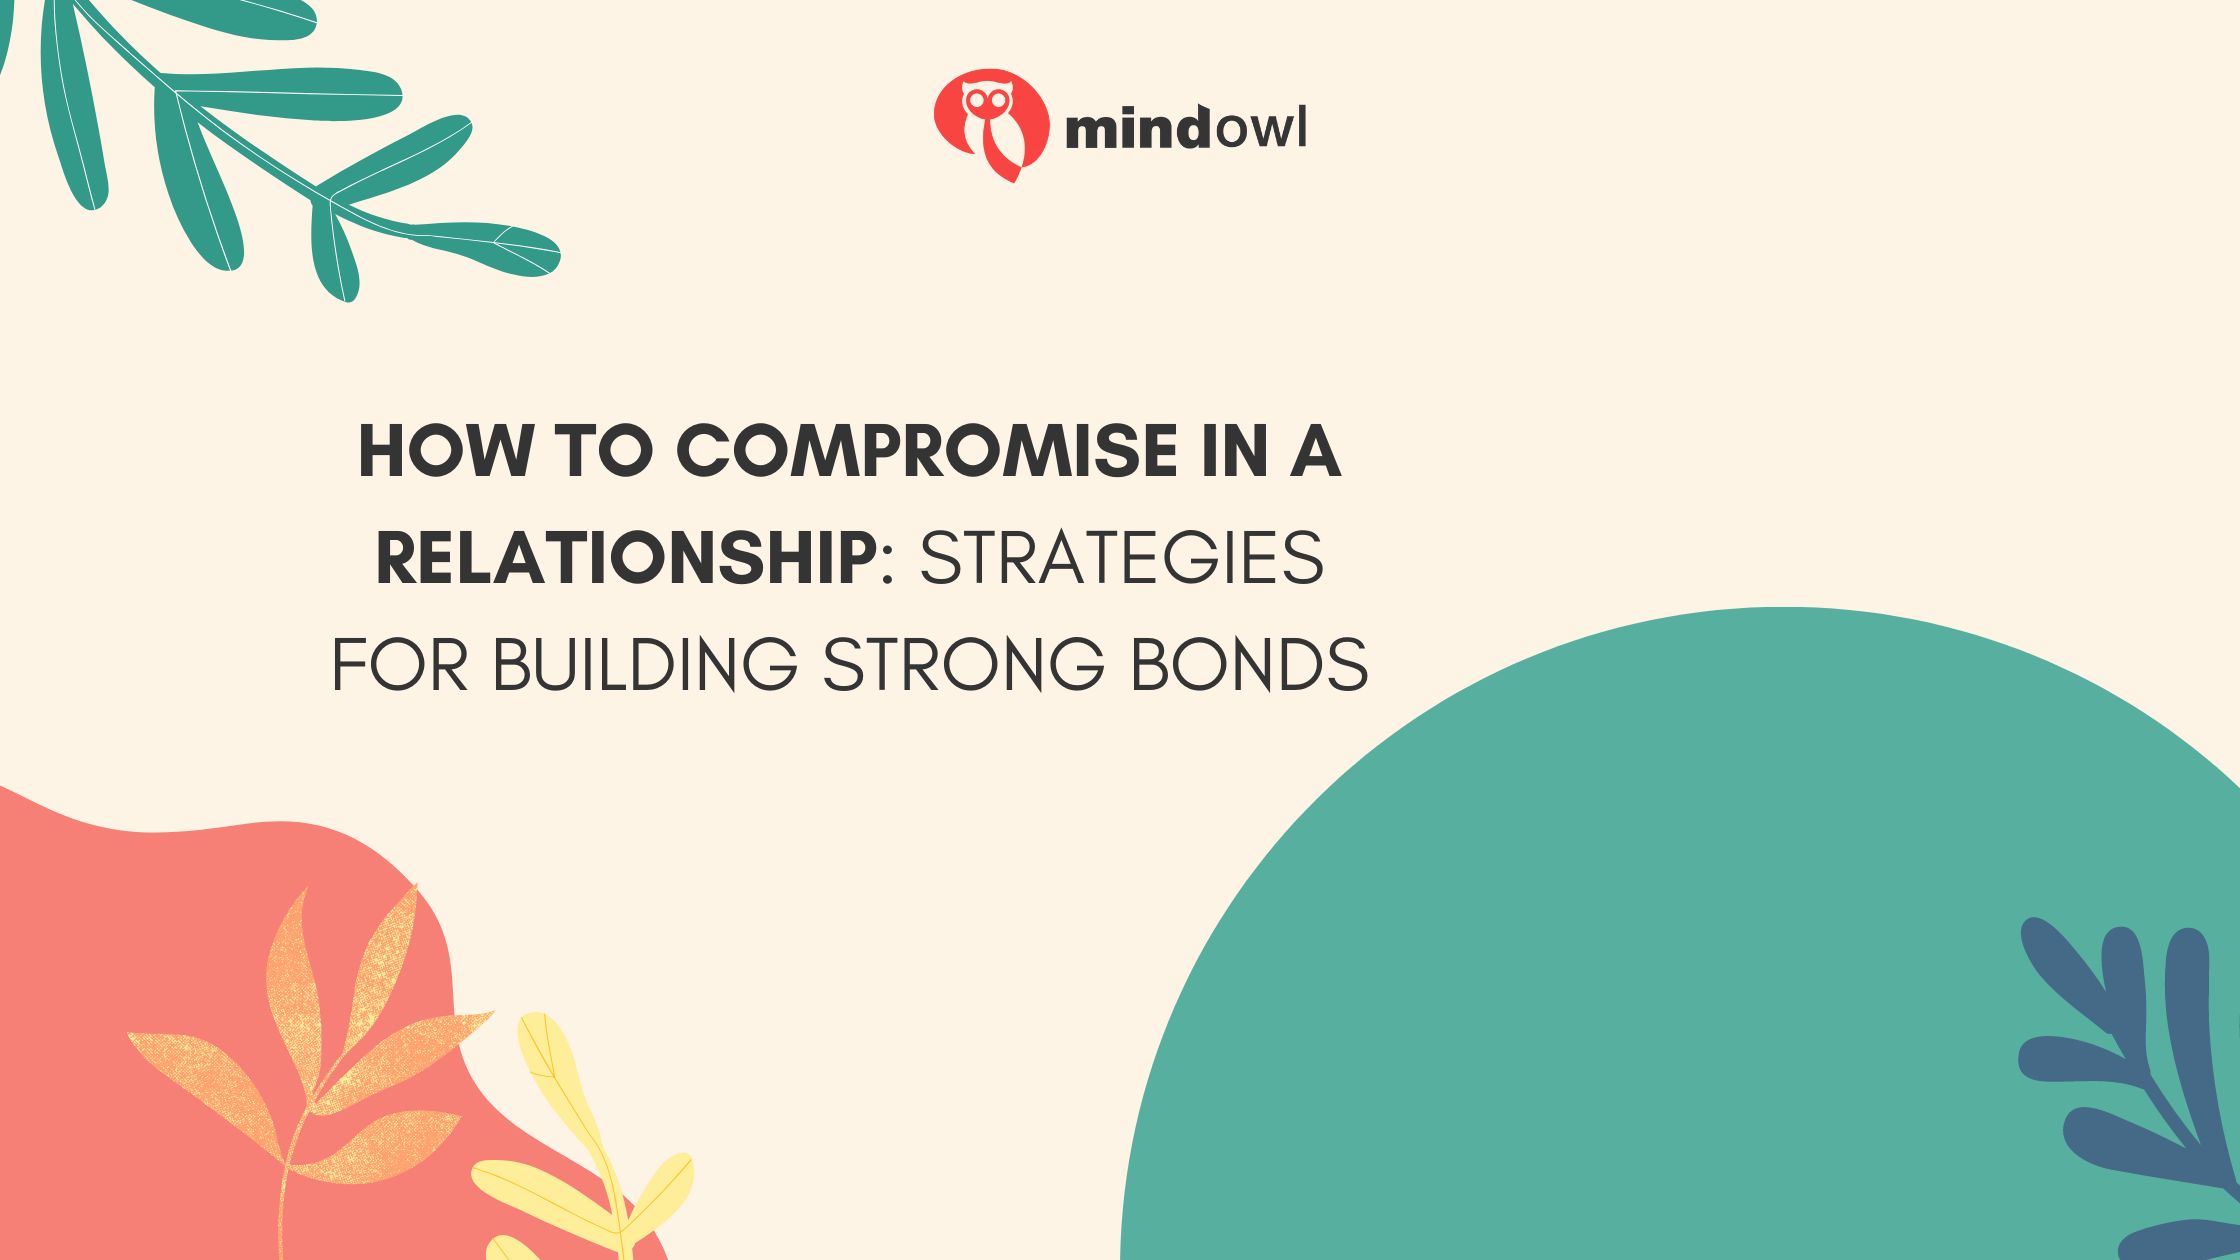 How To Compromise In A Relationship: Strategies For Building Strong Bonds